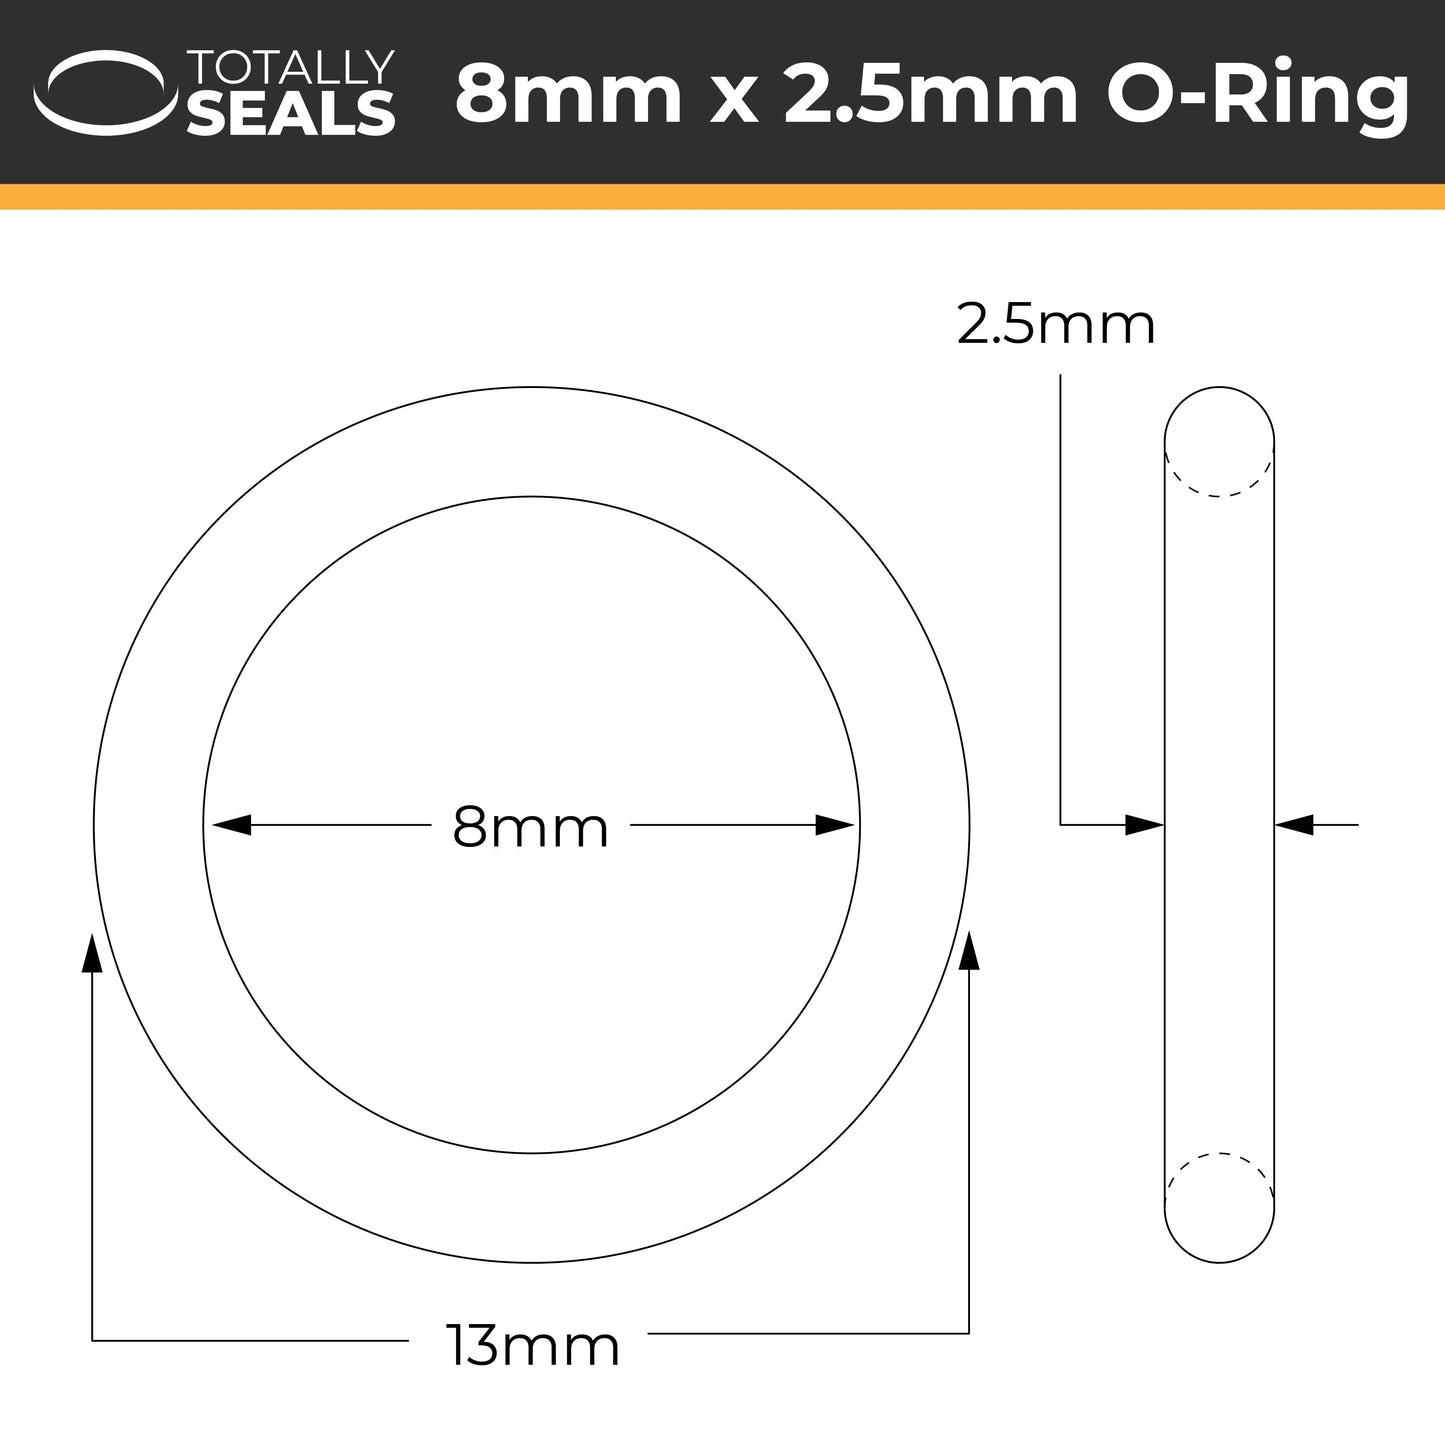 8mm x 2.5mm (13mm OD) Silicone O-Rings - Totally Seals®